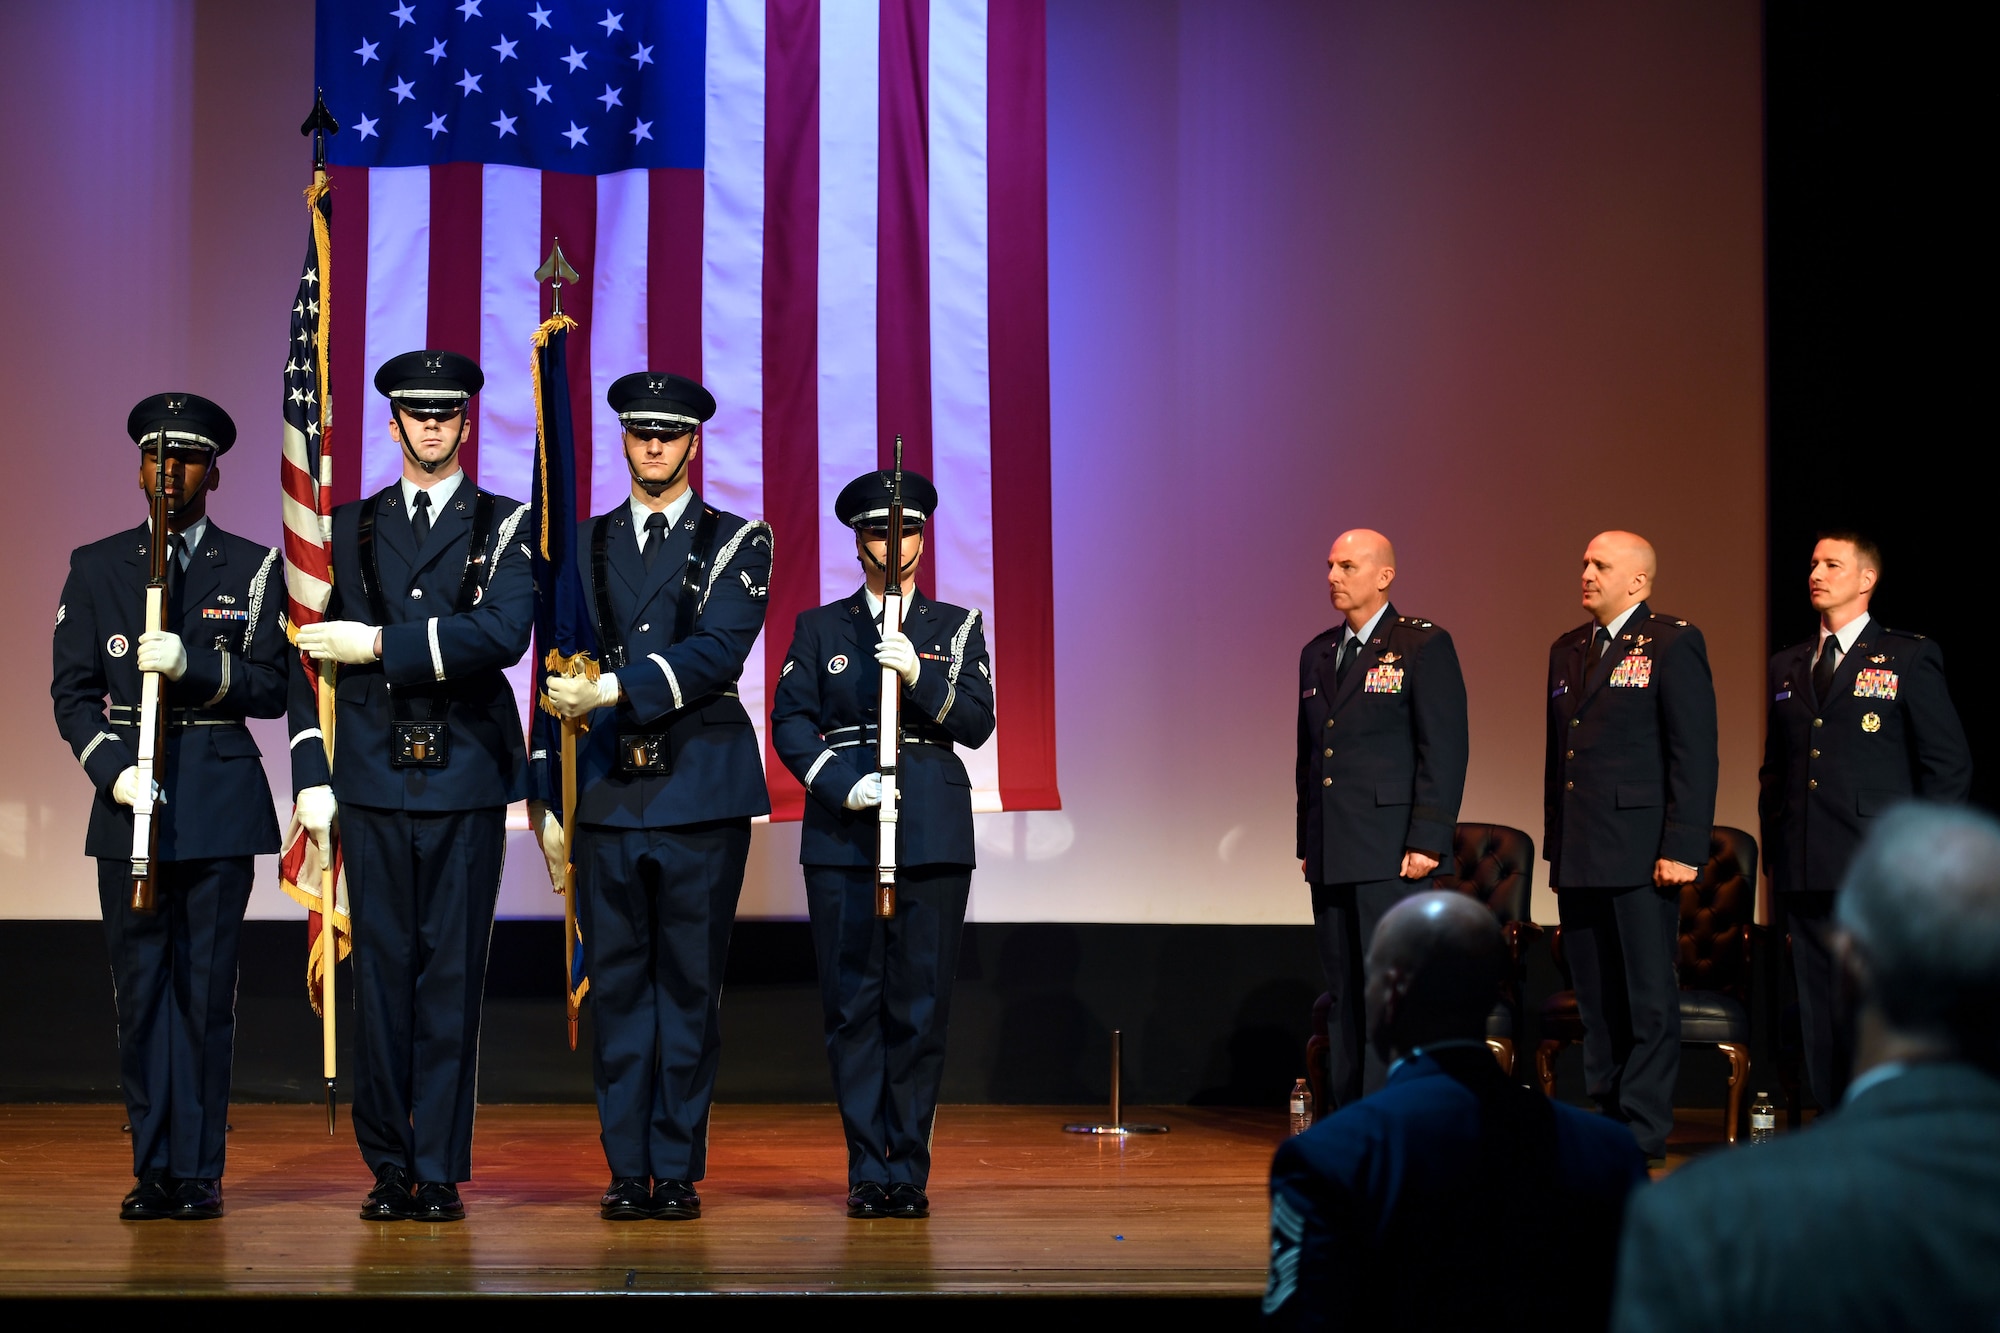 Four Airmen stand on stage during a ceremony